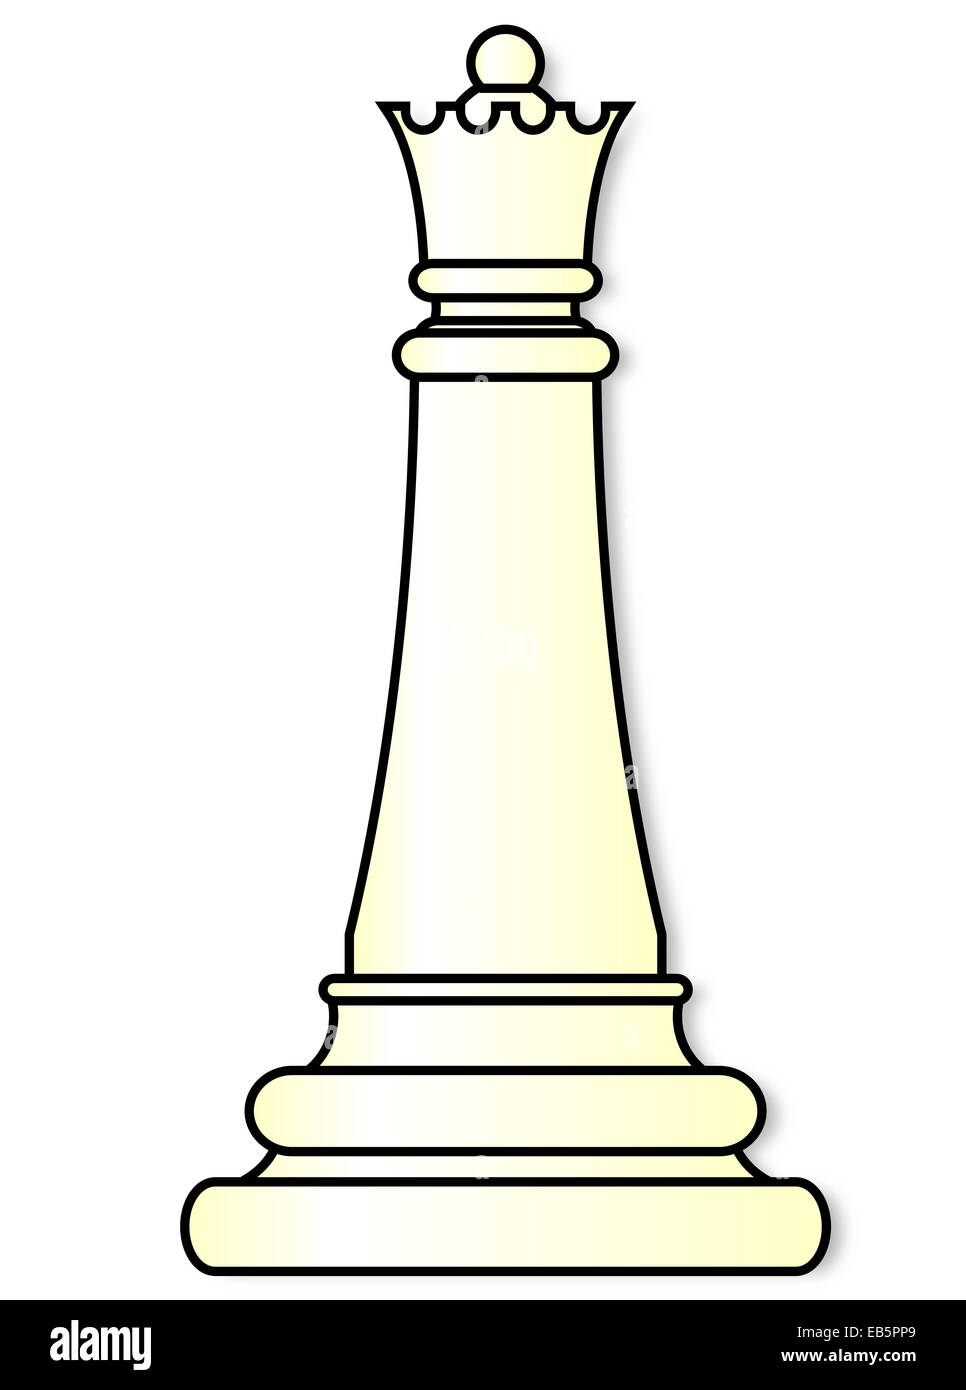 Queen chess piece over a white background Stock Photo